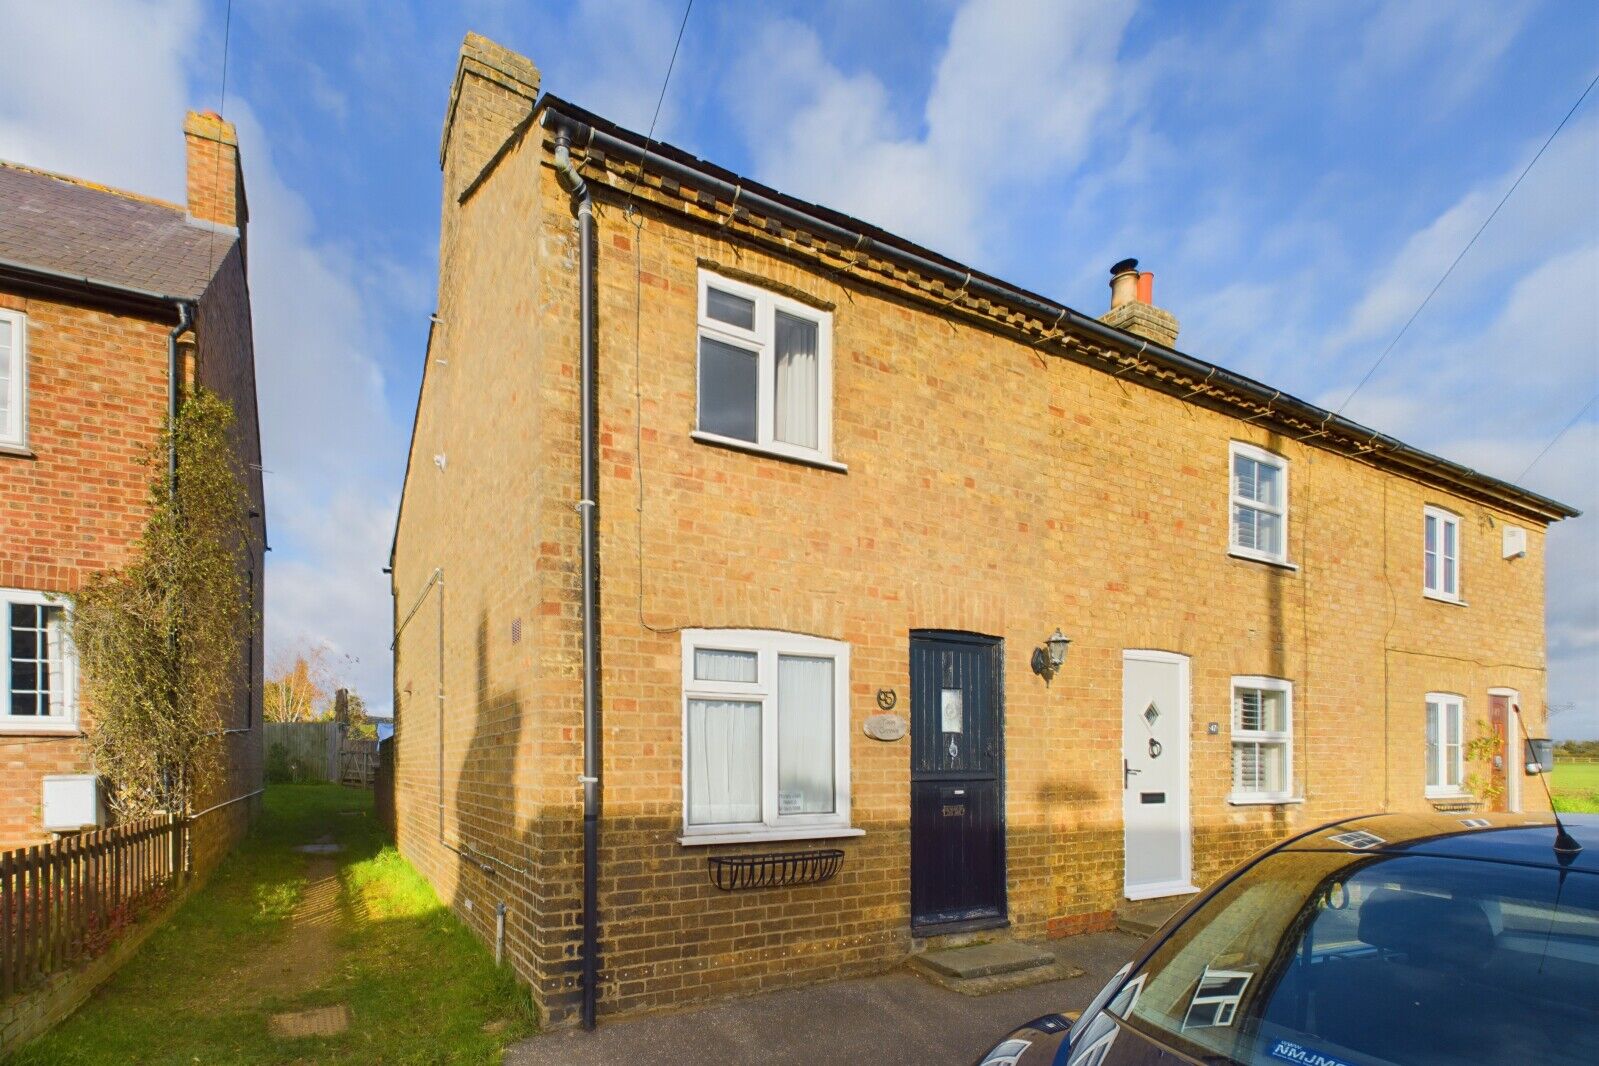 2 bedroom end terraced house for sale Church End, Gamlingay, SG19, main image